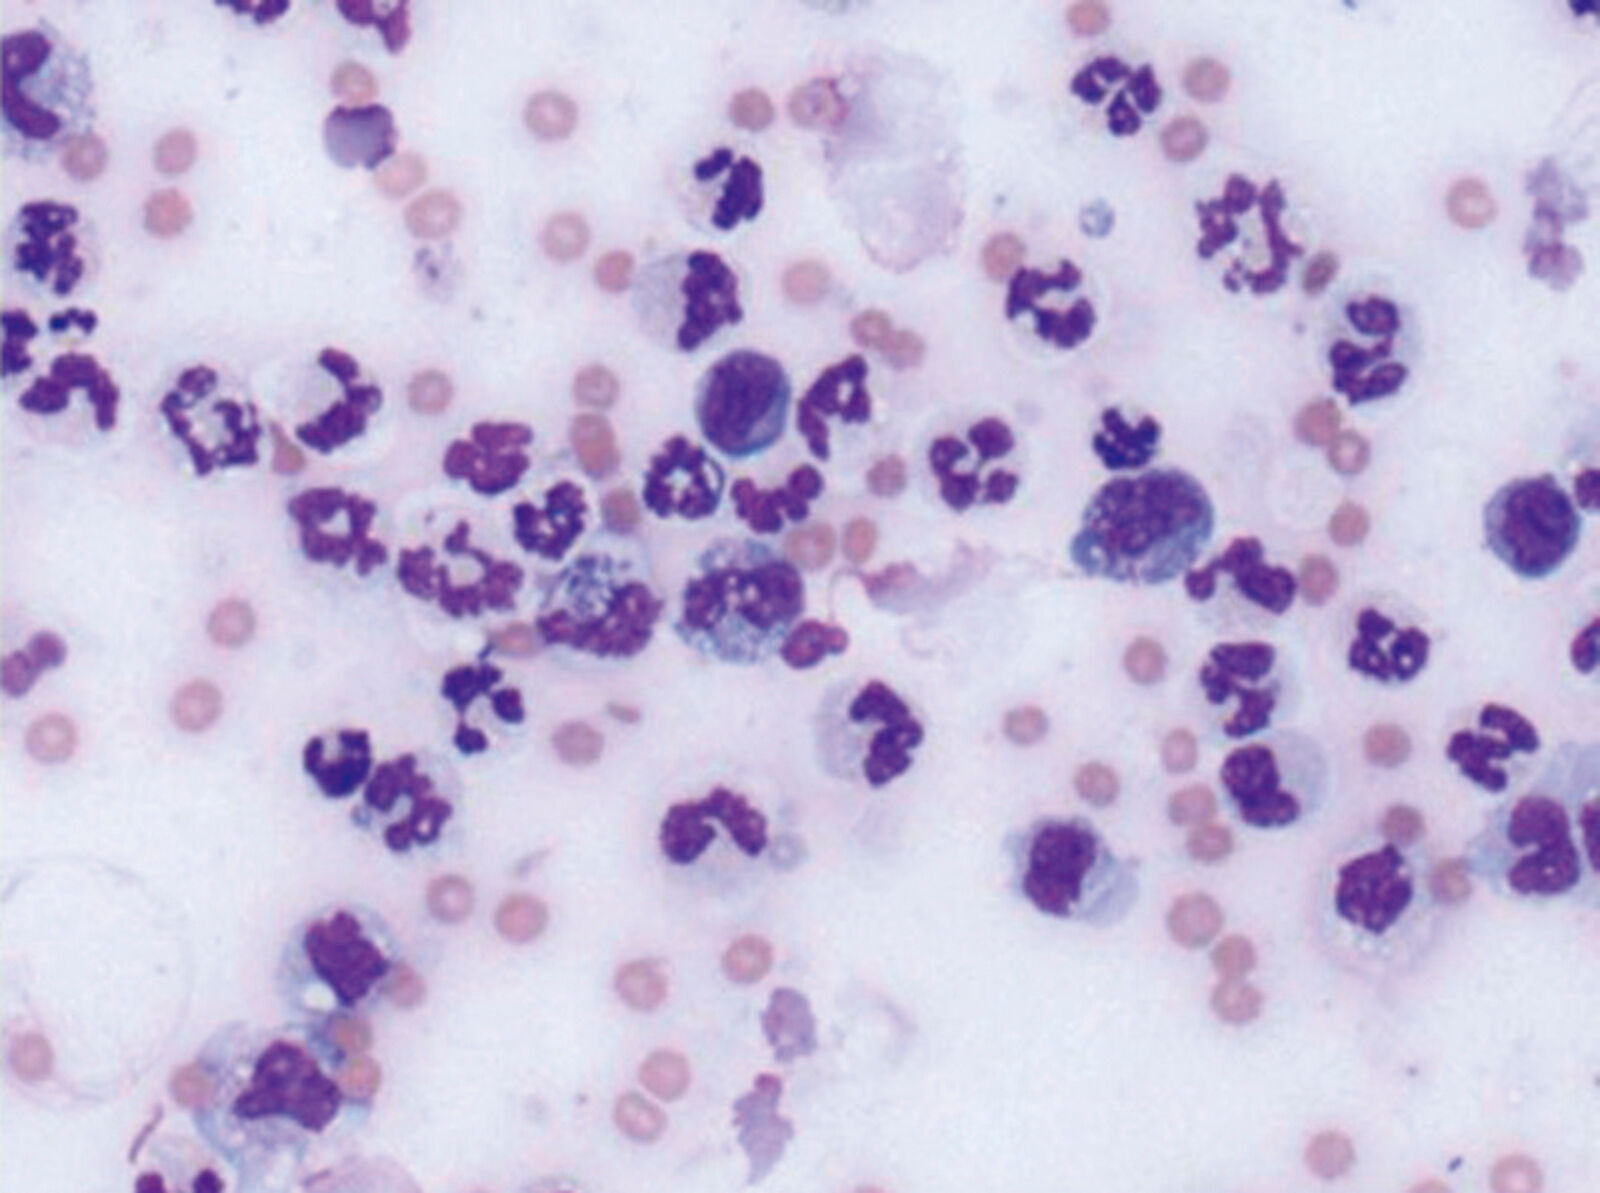 Abdominal effusion at 100X magnification. Note the high number of neutrophils. Intracellular bacteria are also present and can be better visualized at higher magnification.